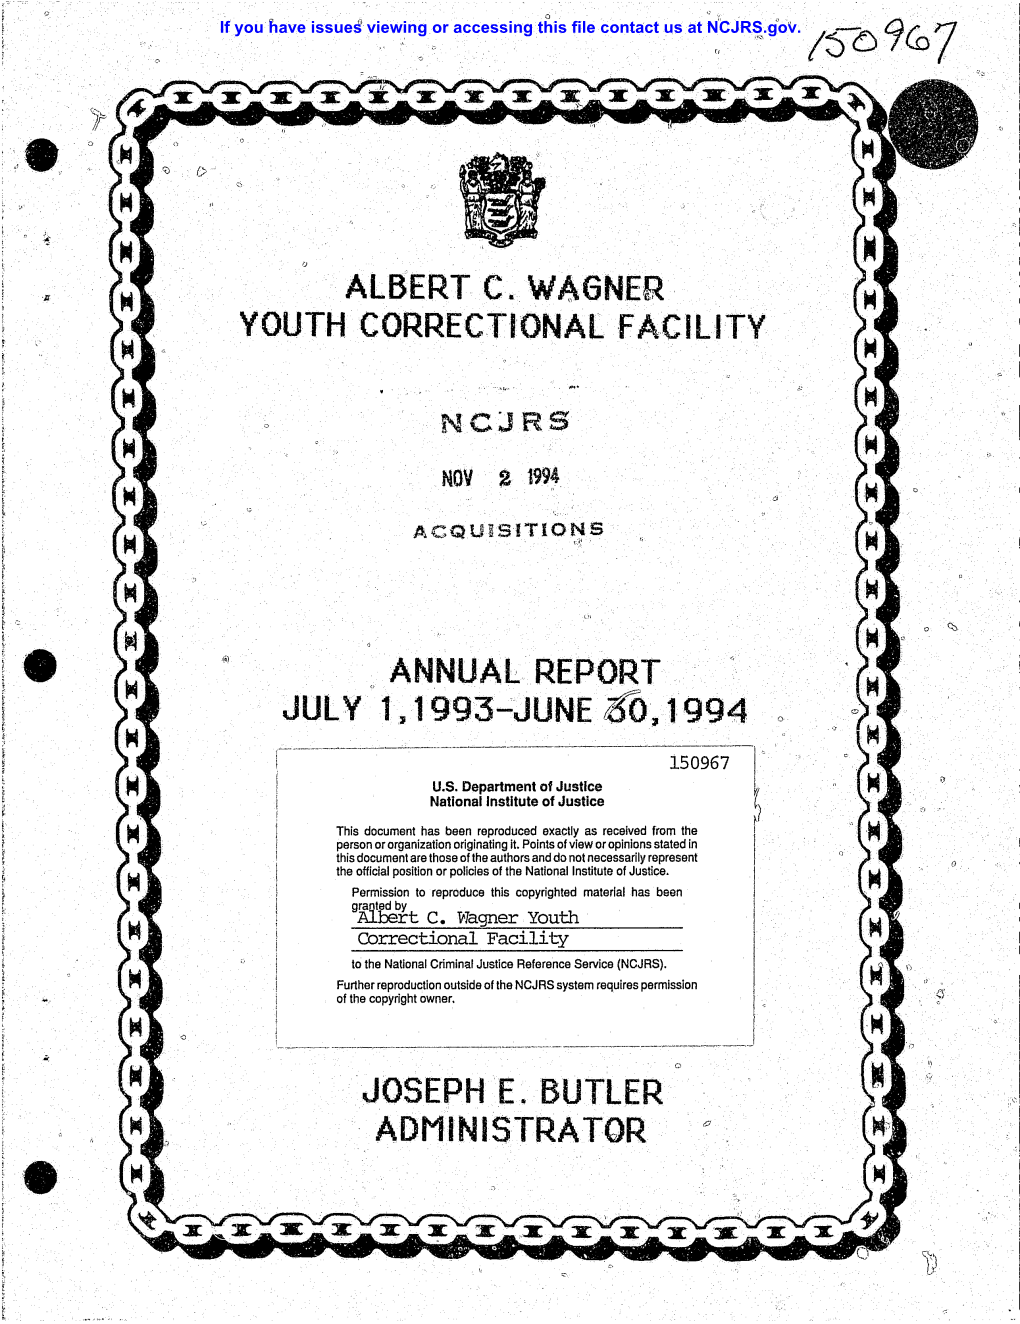 Albert C. Wagner Youth Correctional Facility to the National Criminal Justice Reference Service (NCJRS)